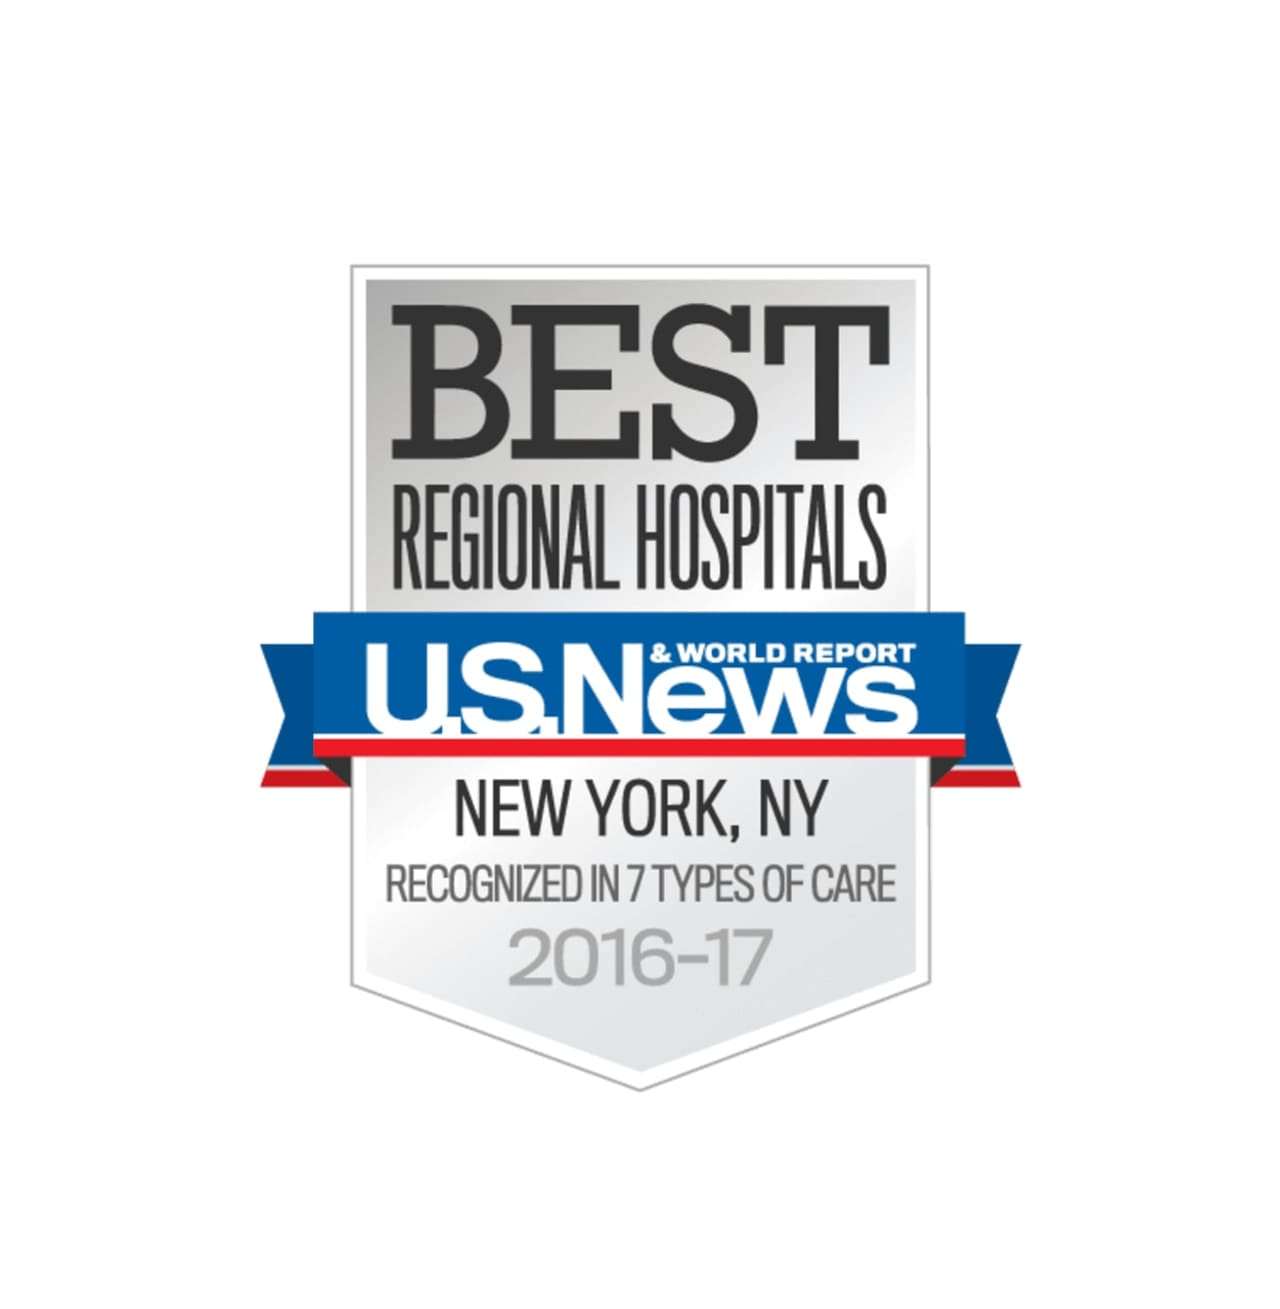 White Plains Hospital has once again been named one of the best in New York by U.S. News & World Report.